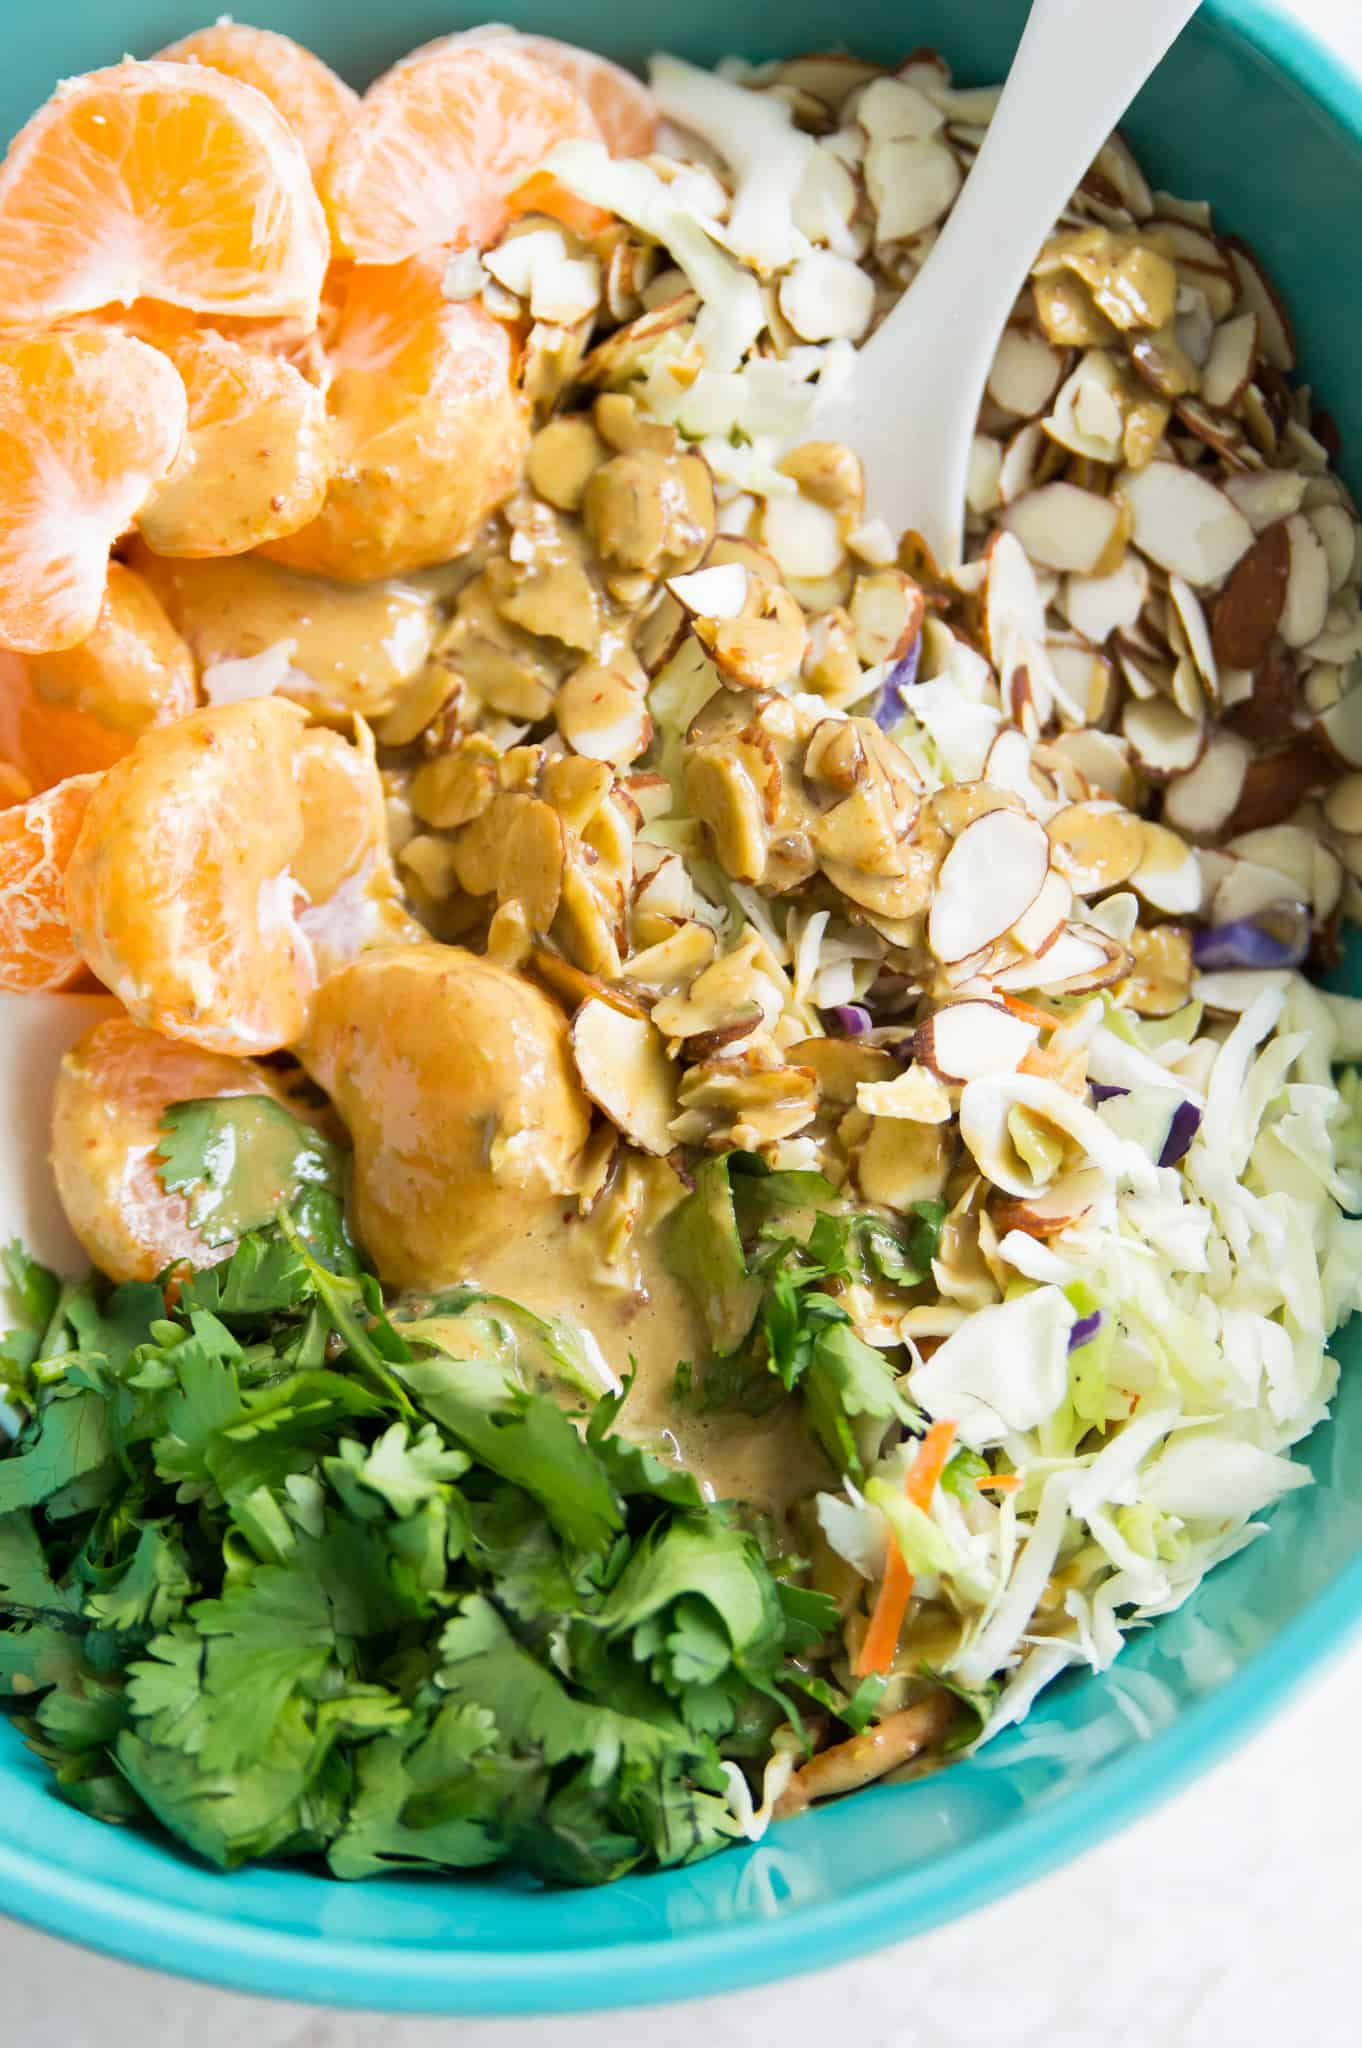 A bowl of coleslaw with mandarin oranges, almonds, cilantro and dressing on it.